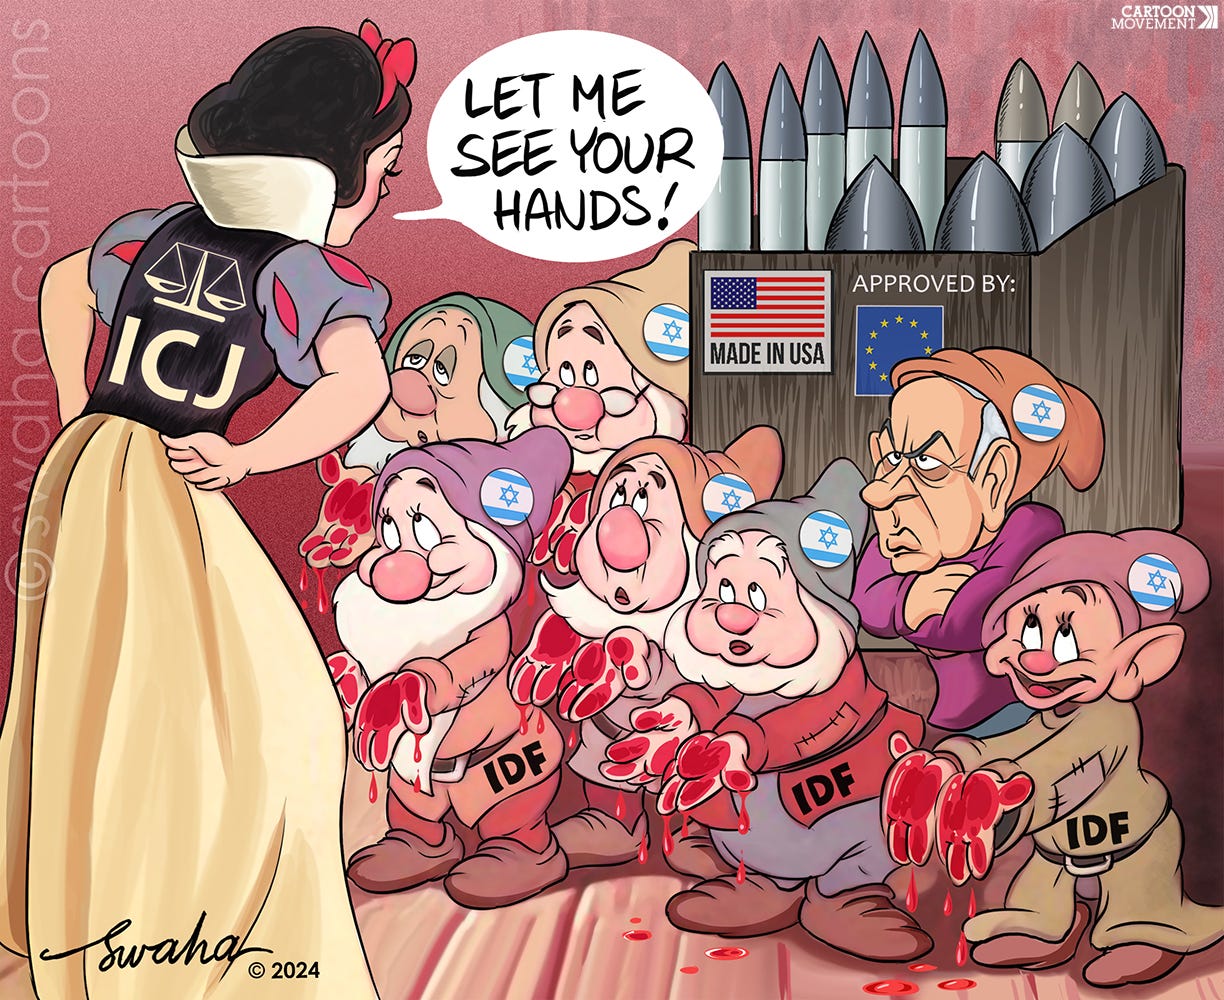 Cartoon showing Snow White standing in front of the seven dwarfs saying: 'Let me see your hands!' On the back of her dress is the ICJ logo. The dwarfs show their hands, which are covered in blood. One dwarf, with the face of Netanyahu, stubbornly refuses to show his hands.